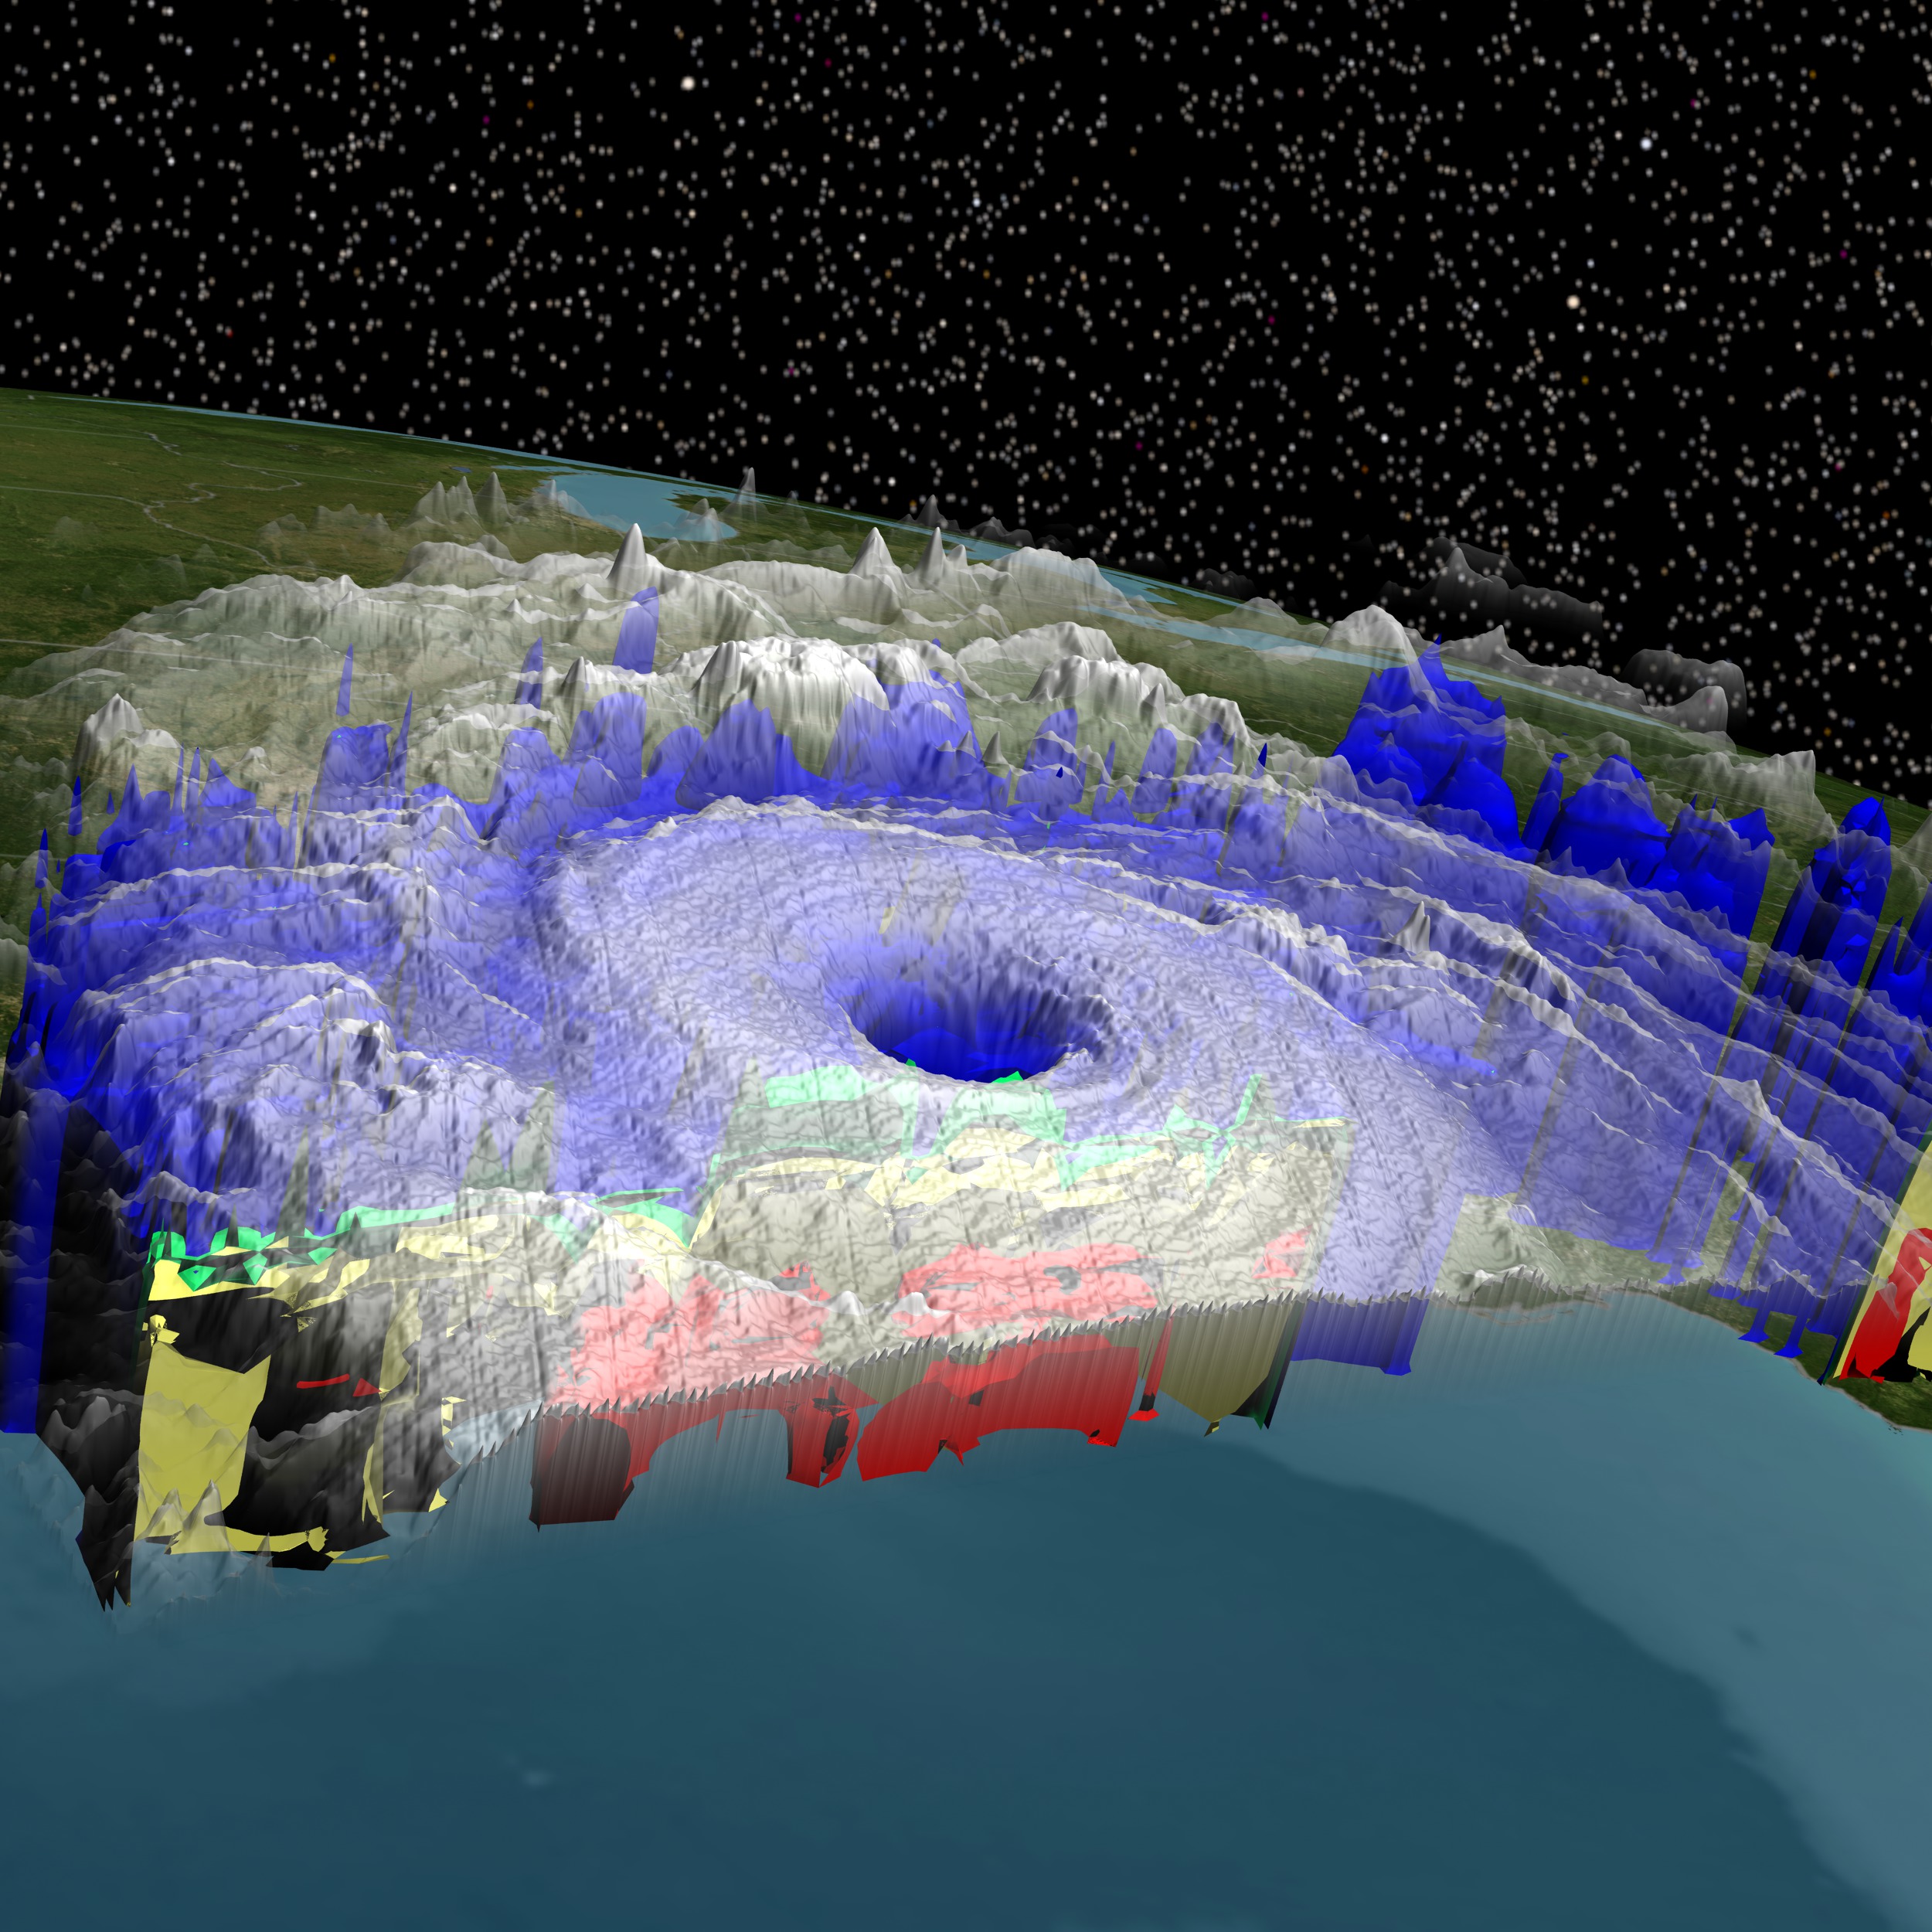 Right eye view of Hurricane Katrina revealing some of the internal structure as seen by the TRMM satellite.